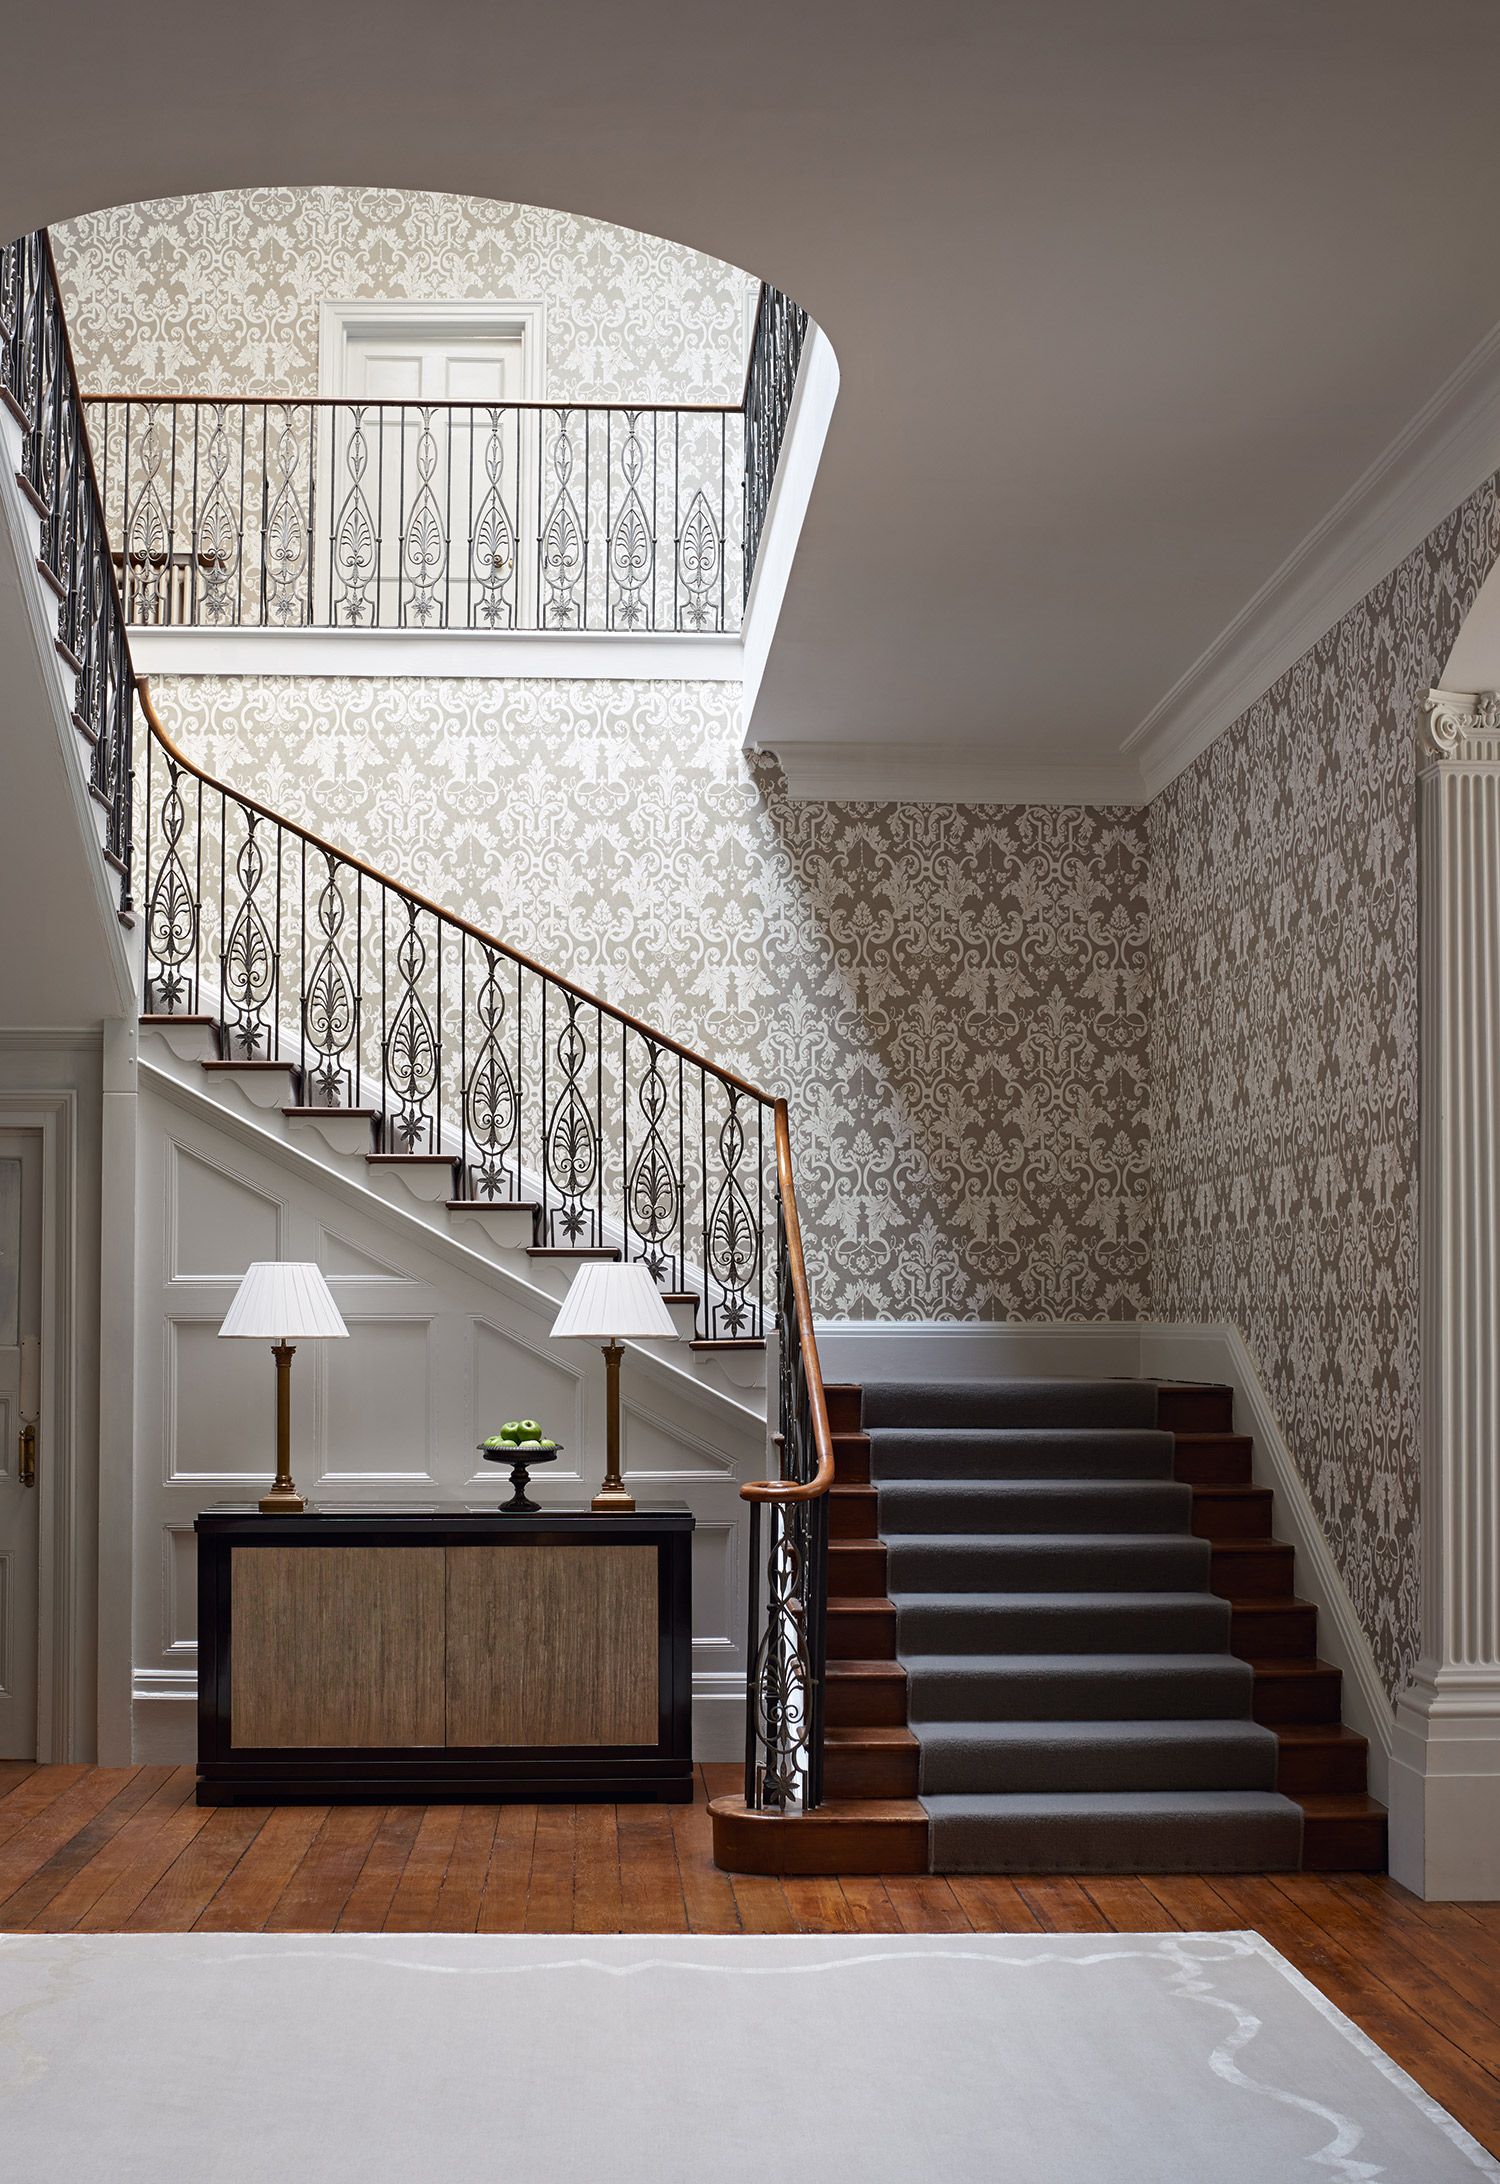 30 Staircase Wall Ideas You Never Thought to Try